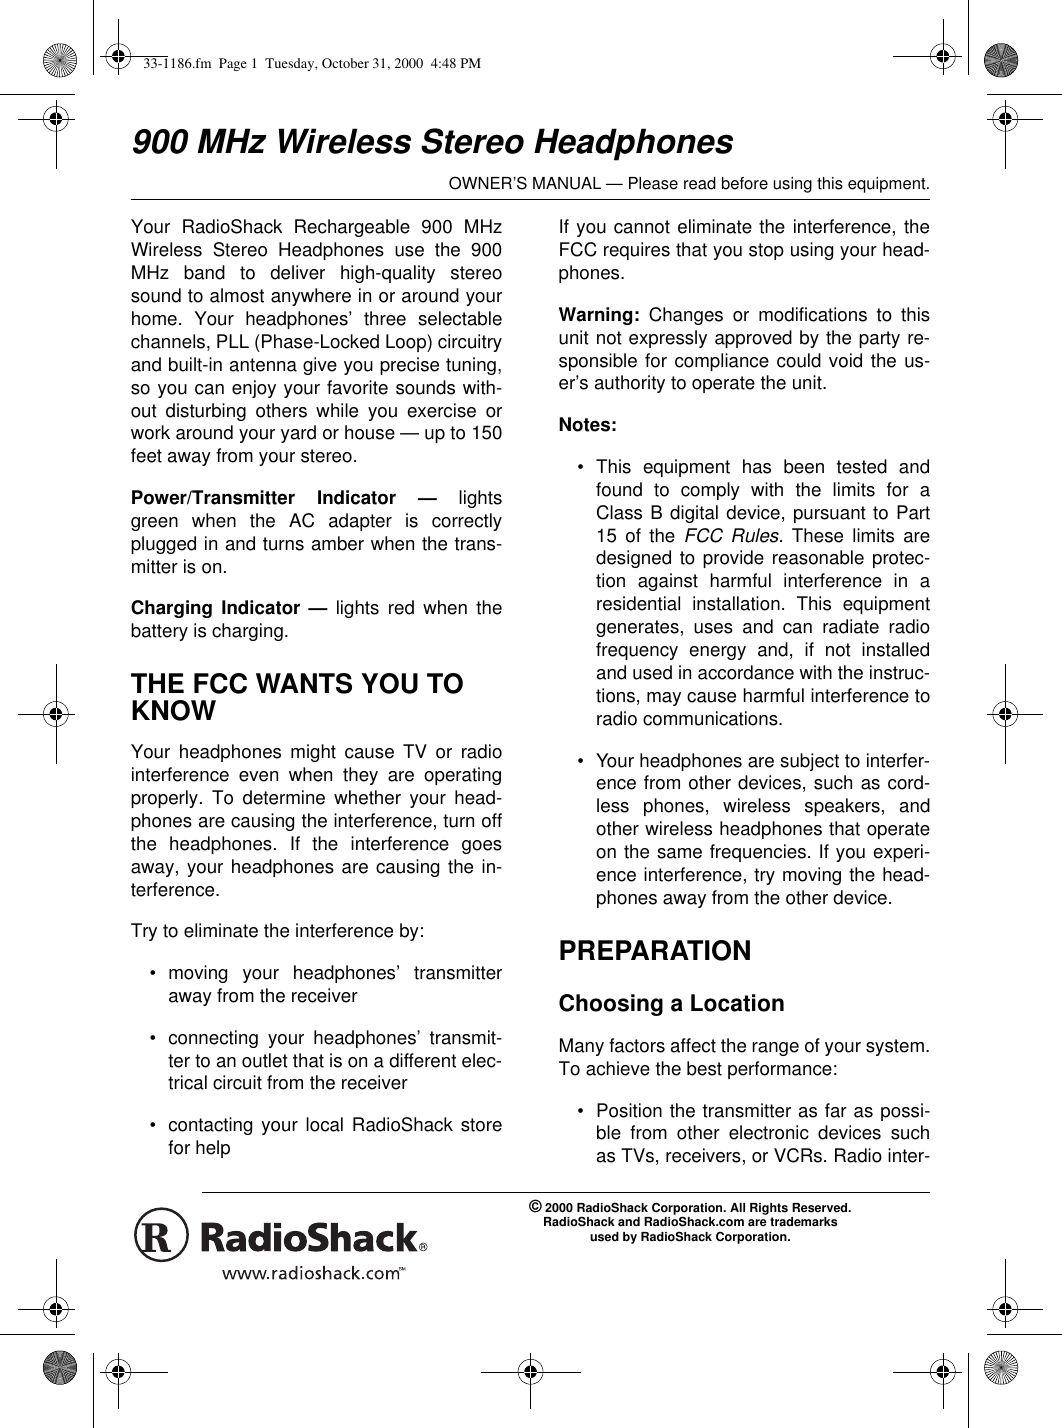 OWNER’S MANUAL — Please read before using this equipment.© 2000 RadioShack Corporation. All Rights Reserved.RadioShack and RadioShack.com are trademarksused by RadioShack Corporation.900 MHz Wireless Stereo HeadphonesYour RadioShack Rechargeable 900 MHzWireless Stereo Headphones use the 900MHz band to deliver high-quality stereosound to almost anywhere in or around yourhome. Your headphones’ three selectablechannels, PLL (Phase-Locked Loop) circuitryand built-in antenna give you precise tuning,so you can enjoy your favorite sounds with-out disturbing others while you exercise orwork around your yard or house — up to 150feet away from your stereo. Power/Transmitter Indicator — lightsgreen when the AC adapter is correctlyplugged in and turns amber when the trans-mitter is on.Charging Indicator — lights red when thebattery is charging.THE FCC WANTS YOU TO KNOWYour headphones might cause TV or radiointerference even when they are operatingproperly. To determine whether your head-phones are causing the interference, turn offthe headphones. If the interference goesaway, your headphones are causing the in-terference. Try to eliminate the interference by:• moving your headphones’ transmitteraway from the receiver• connecting your headphones’ transmit-ter to an outlet that is on a different elec-trical circuit from the receiver• contacting your local RadioShack storefor helpIf you cannot eliminate the interference, theFCC requires that you stop using your head-phones.Warning:  Changes or modifications to thisunit not expressly approved by the party re-sponsible for compliance could void the us-er’s authority to operate the unit.Notes: • This equipment has been tested andfound to comply with the limits for aClass B digital device, pursuant to Part15 of the FCC Rules. These limits aredesigned to provide reasonable protec-tion against harmful interference in aresidential installation. This equipmentgenerates, uses and can radiate radiofrequency energy and, if not installedand used in accordance with the instruc-tions, may cause harmful interference toradio communications.• Your headphones are subject to interfer-ence from other devices, such as cord-less phones, wireless speakers, andother wireless headphones that operateon the same frequencies. If you experi-ence interference, try moving the head-phones away from the other device.PREPARATIONChoosing a LocationMany factors affect the range of your system.To achieve the best performance:• Position the transmitter as far as possi-ble from other electronic devices suchas TVs, receivers, or VCRs. Radio inter-33-1186.fm  Page 1  Tuesday, October 31, 2000  4:48 PM